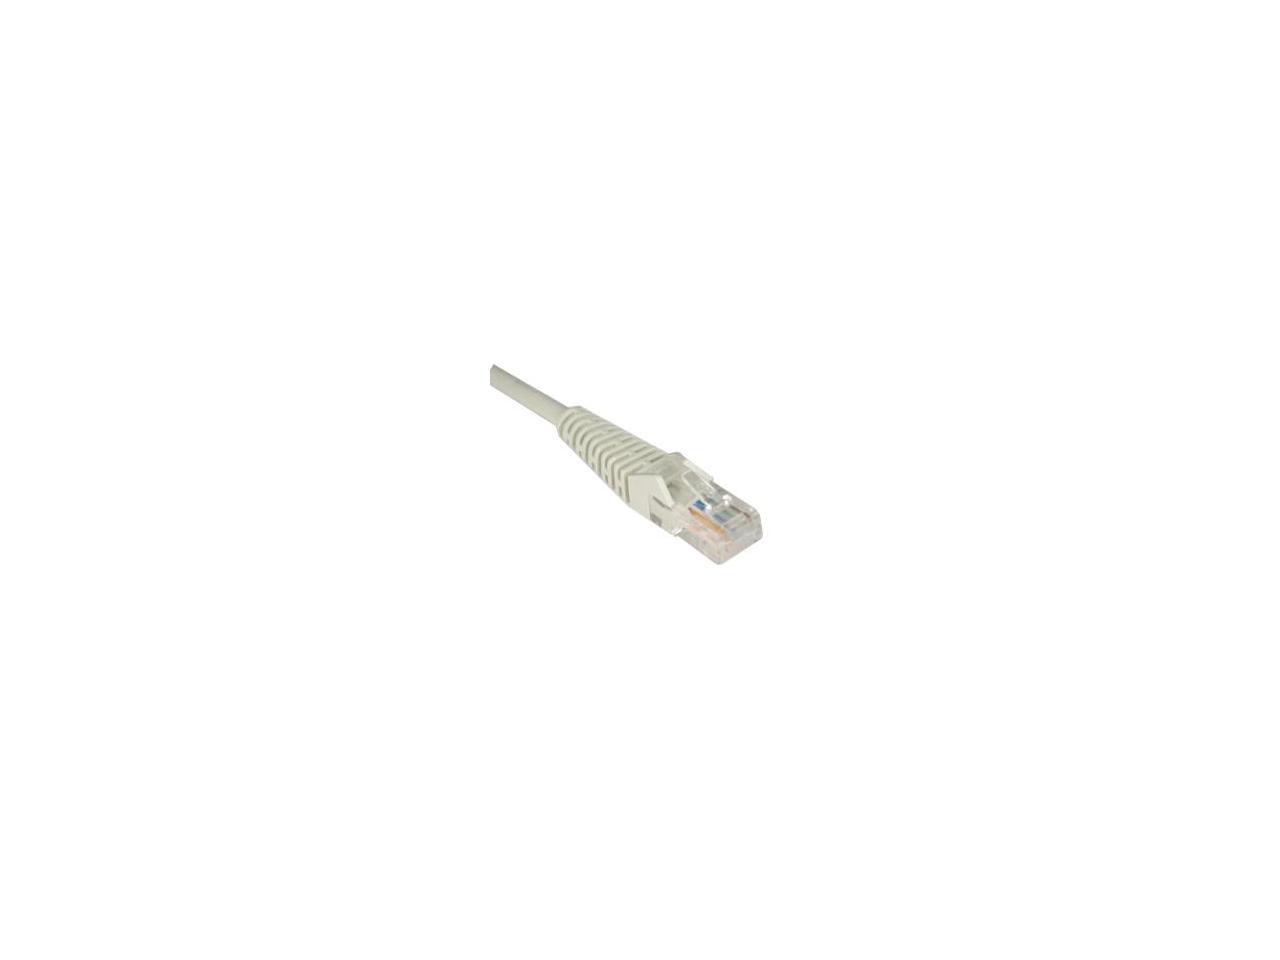 TRIPP LITE N001-014-GY 14 ft. Cat 5E Gray Network Cable